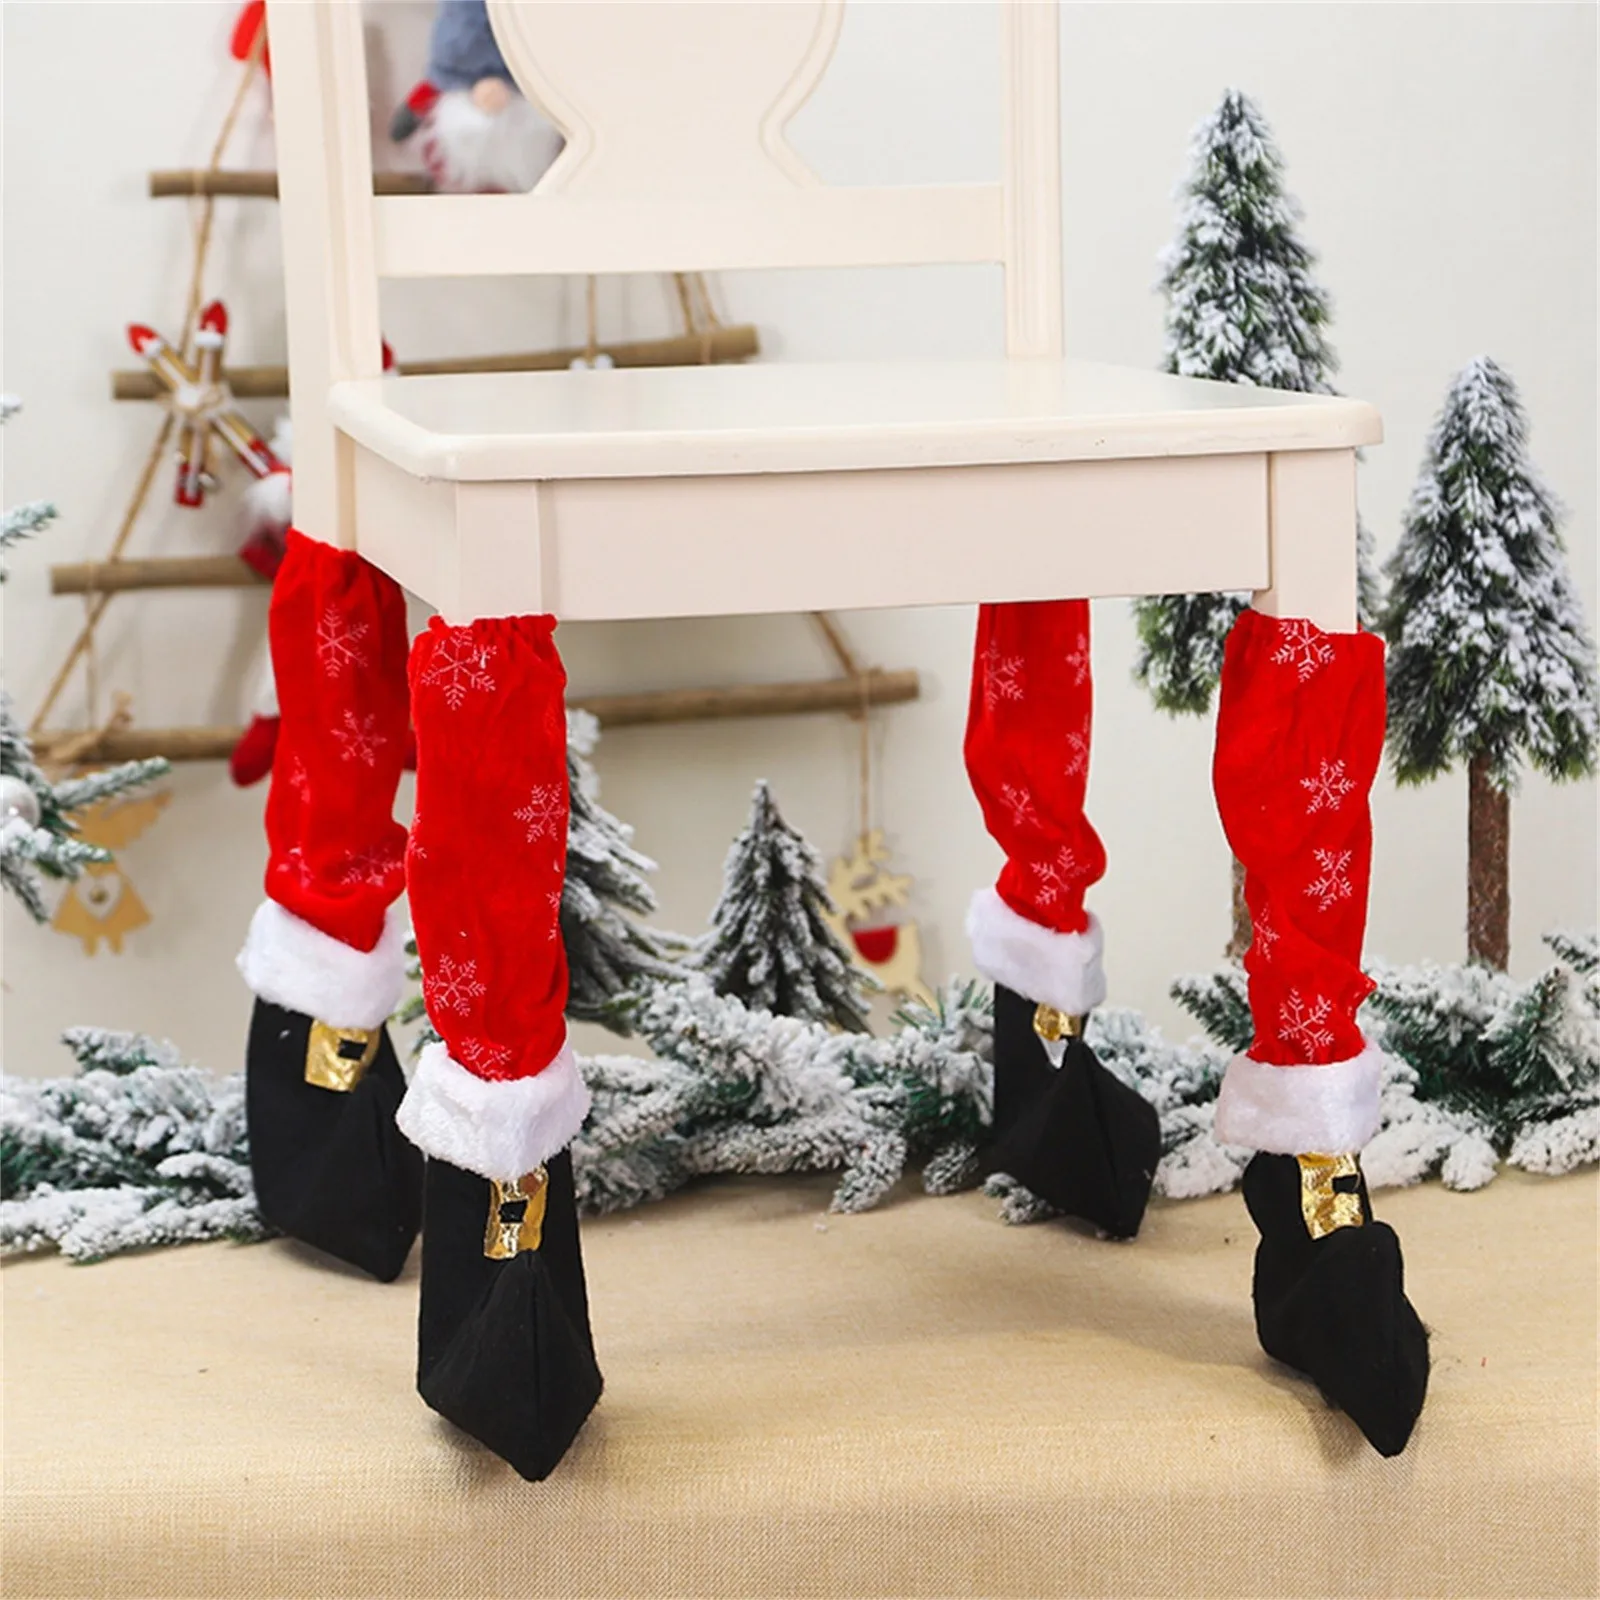 Details about   Table Foot Cover Chair Table Christmas Decorations Christmas Ornament Home Decor 